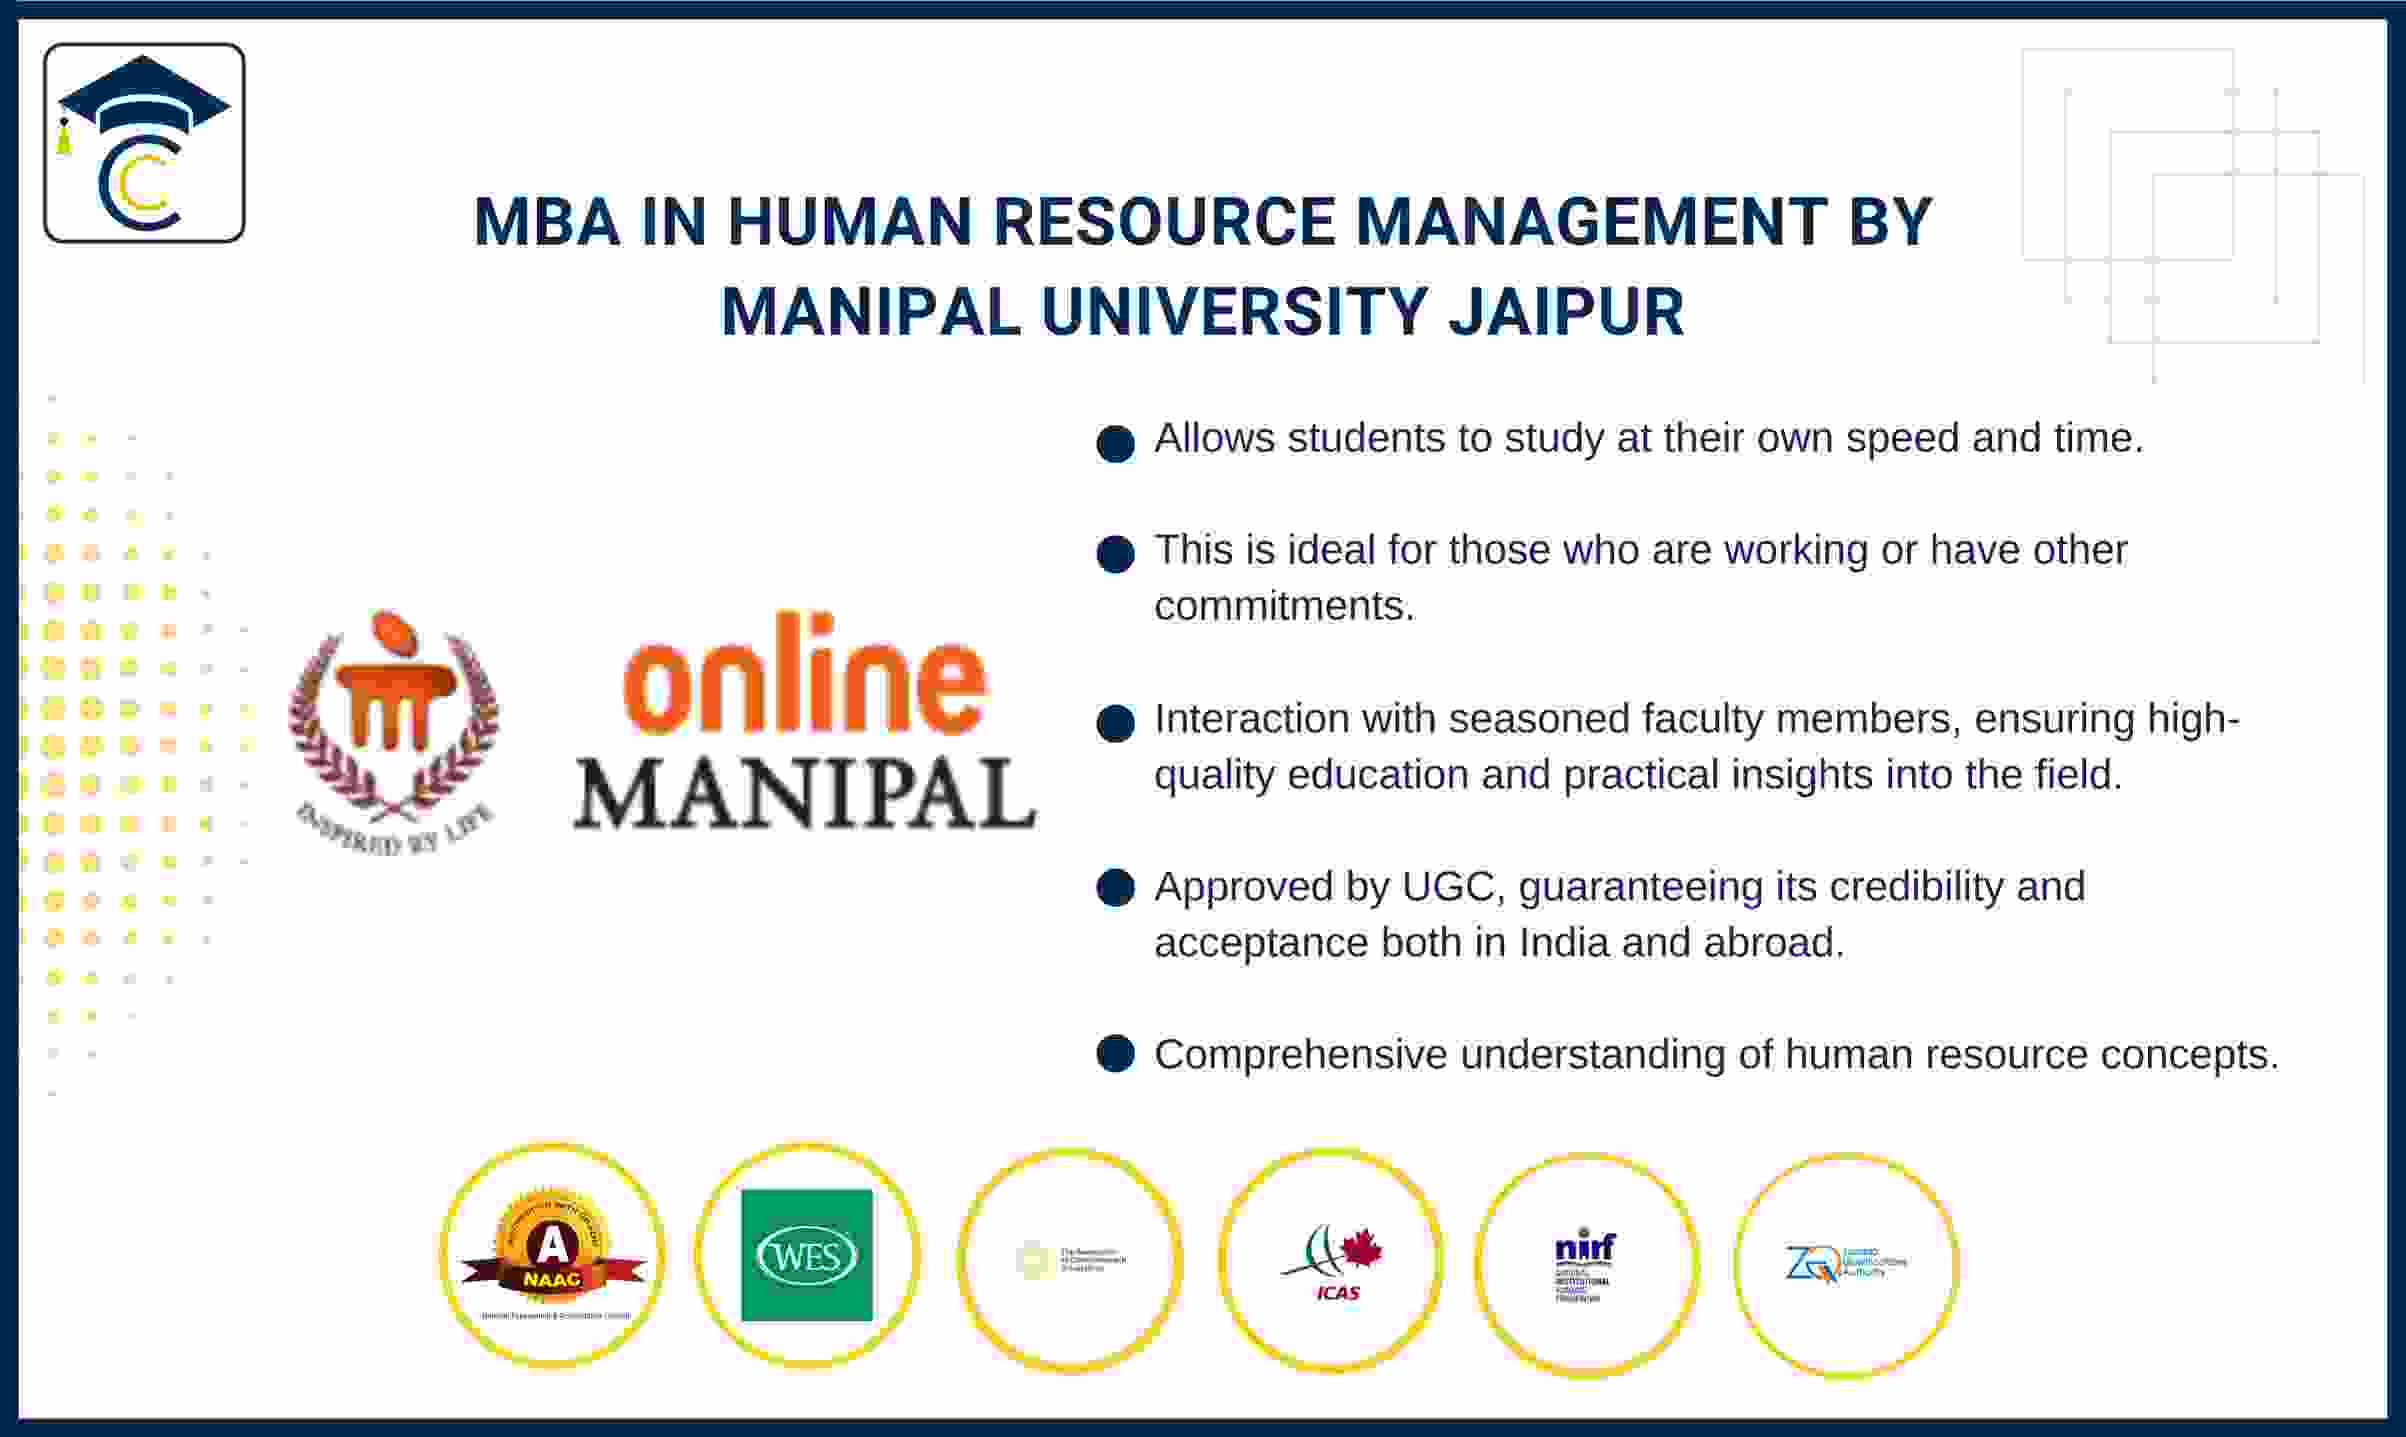 mba-in-human-resource-management-manipal-university